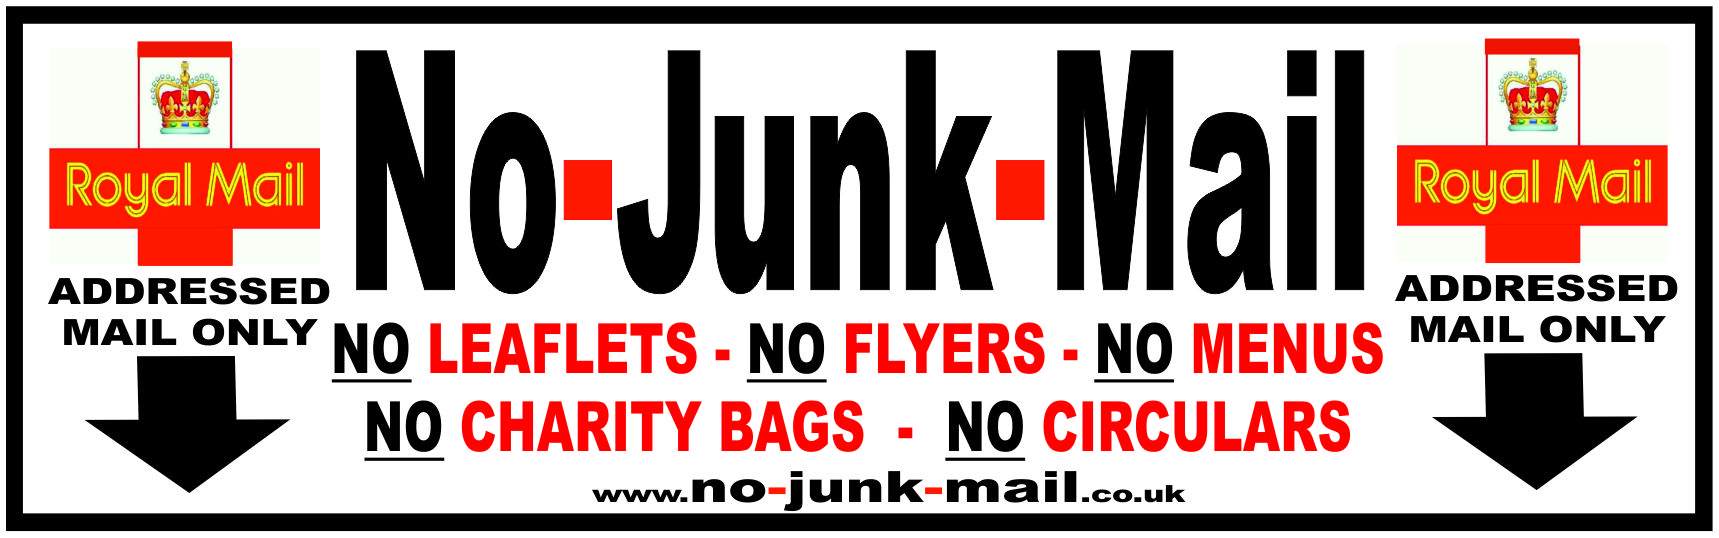 uk No Junk Mail Sign. Vinyl Decals Self Adhesive Sticker, Addressed Mail Only, No Junk Mail Letterbox Sticker, How To Stop Junk Mail, Royal Mail Logo, Ref RMO, Letterbox Sign, Stick On Sticker, Outdoor Use, Waterproof, Weatherproof, Washable, Unwanted Items Of Mail, Postman, Canvassering